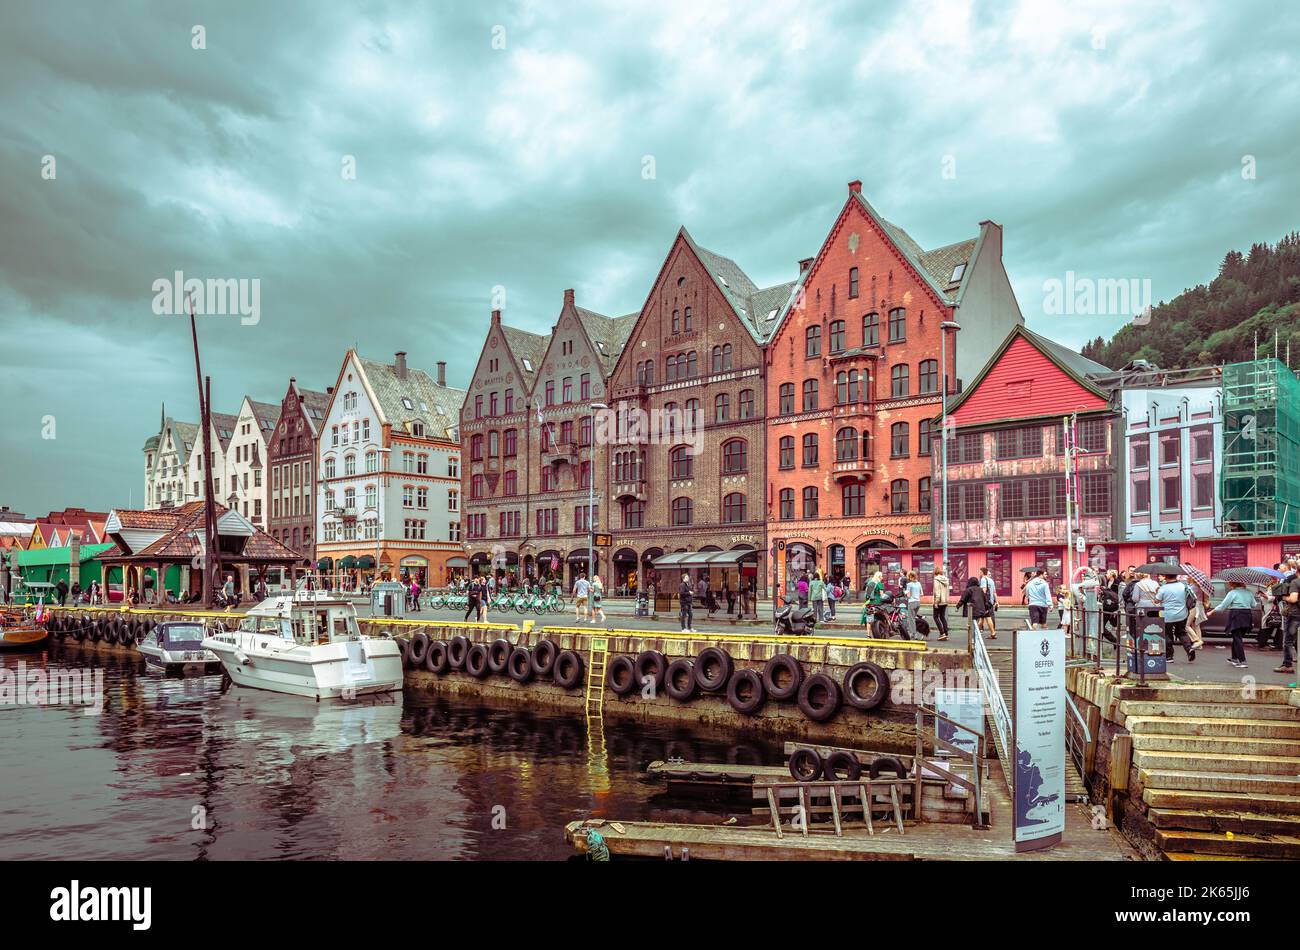 View of Bryggen, Bergen, Norway, on a rainy day, with the Hanseatic heritage commercial buildings lining up the eastern side of the Vågen harbour. Stock Photo